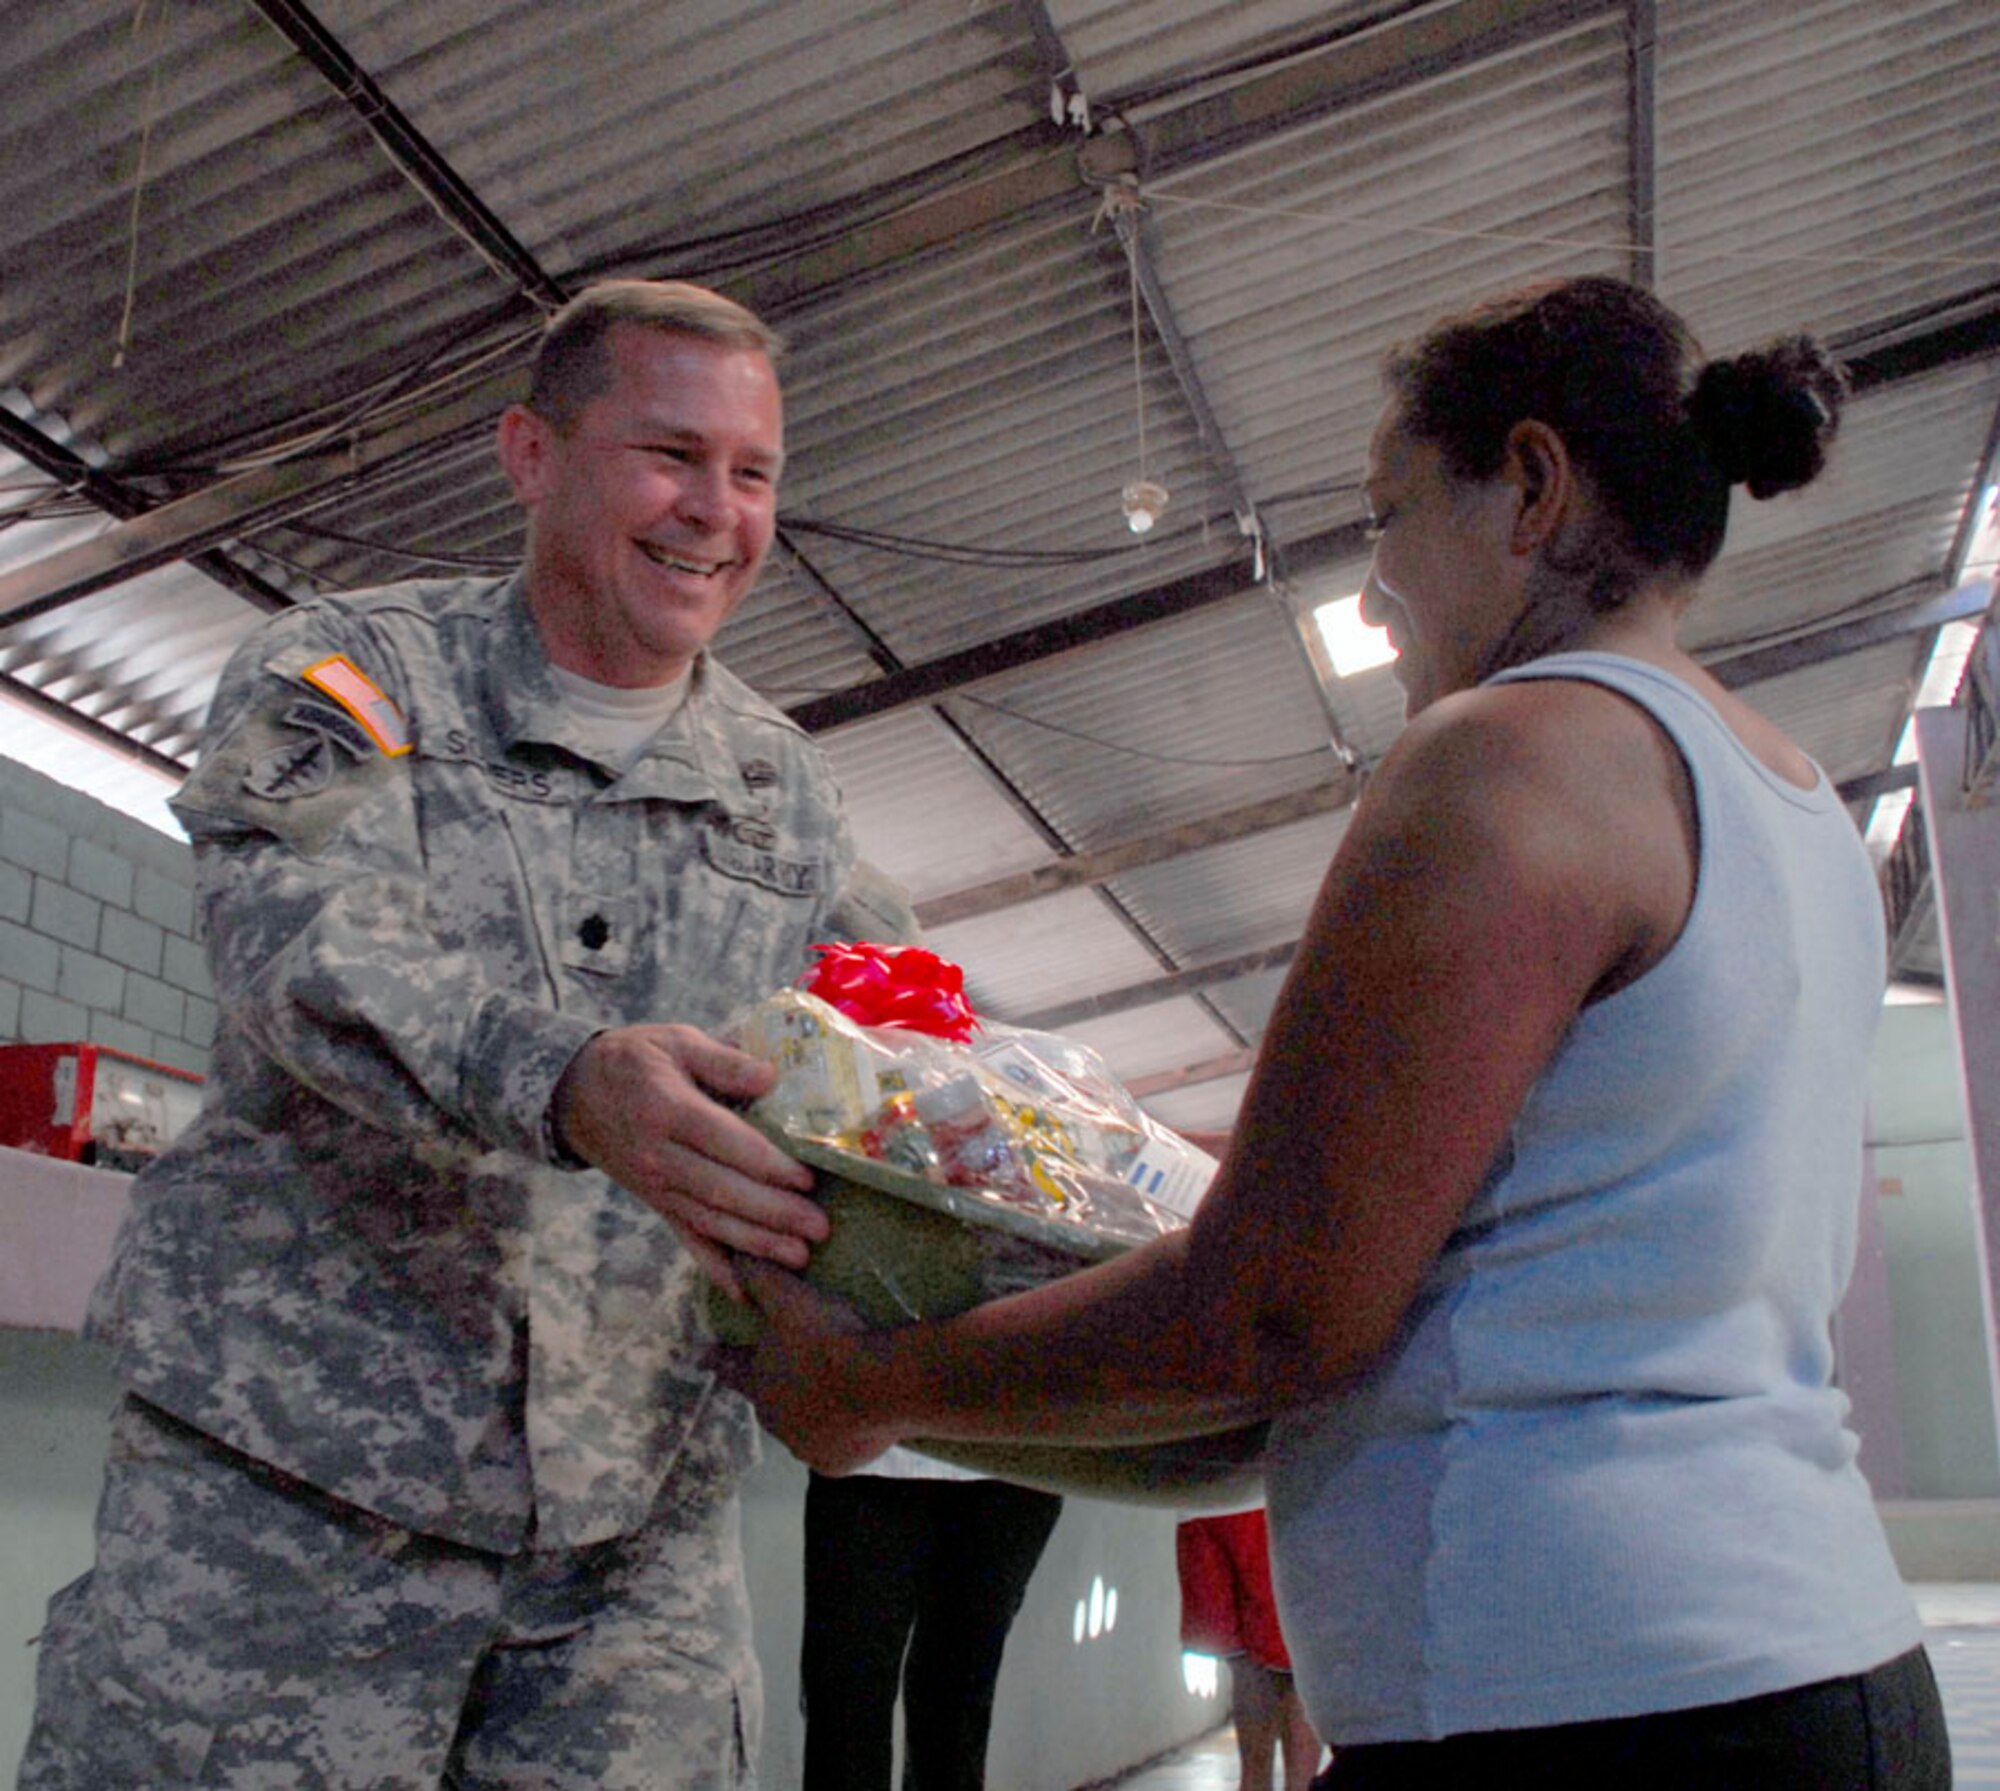 AJUTERIQUE, Honduras - Army Lt. Col. Richard Somers, Joint Task Force-Bravo Army Forces commander, gives a gift basket to a local Dec. 9. The baskets, full of essential food and supplies, were from JTF-Bravo and Southern Command to more than 100 local families who were recently affected by widespread flooding. (U.S. Air Force photo by Staff Sgt. Joel Mease) 